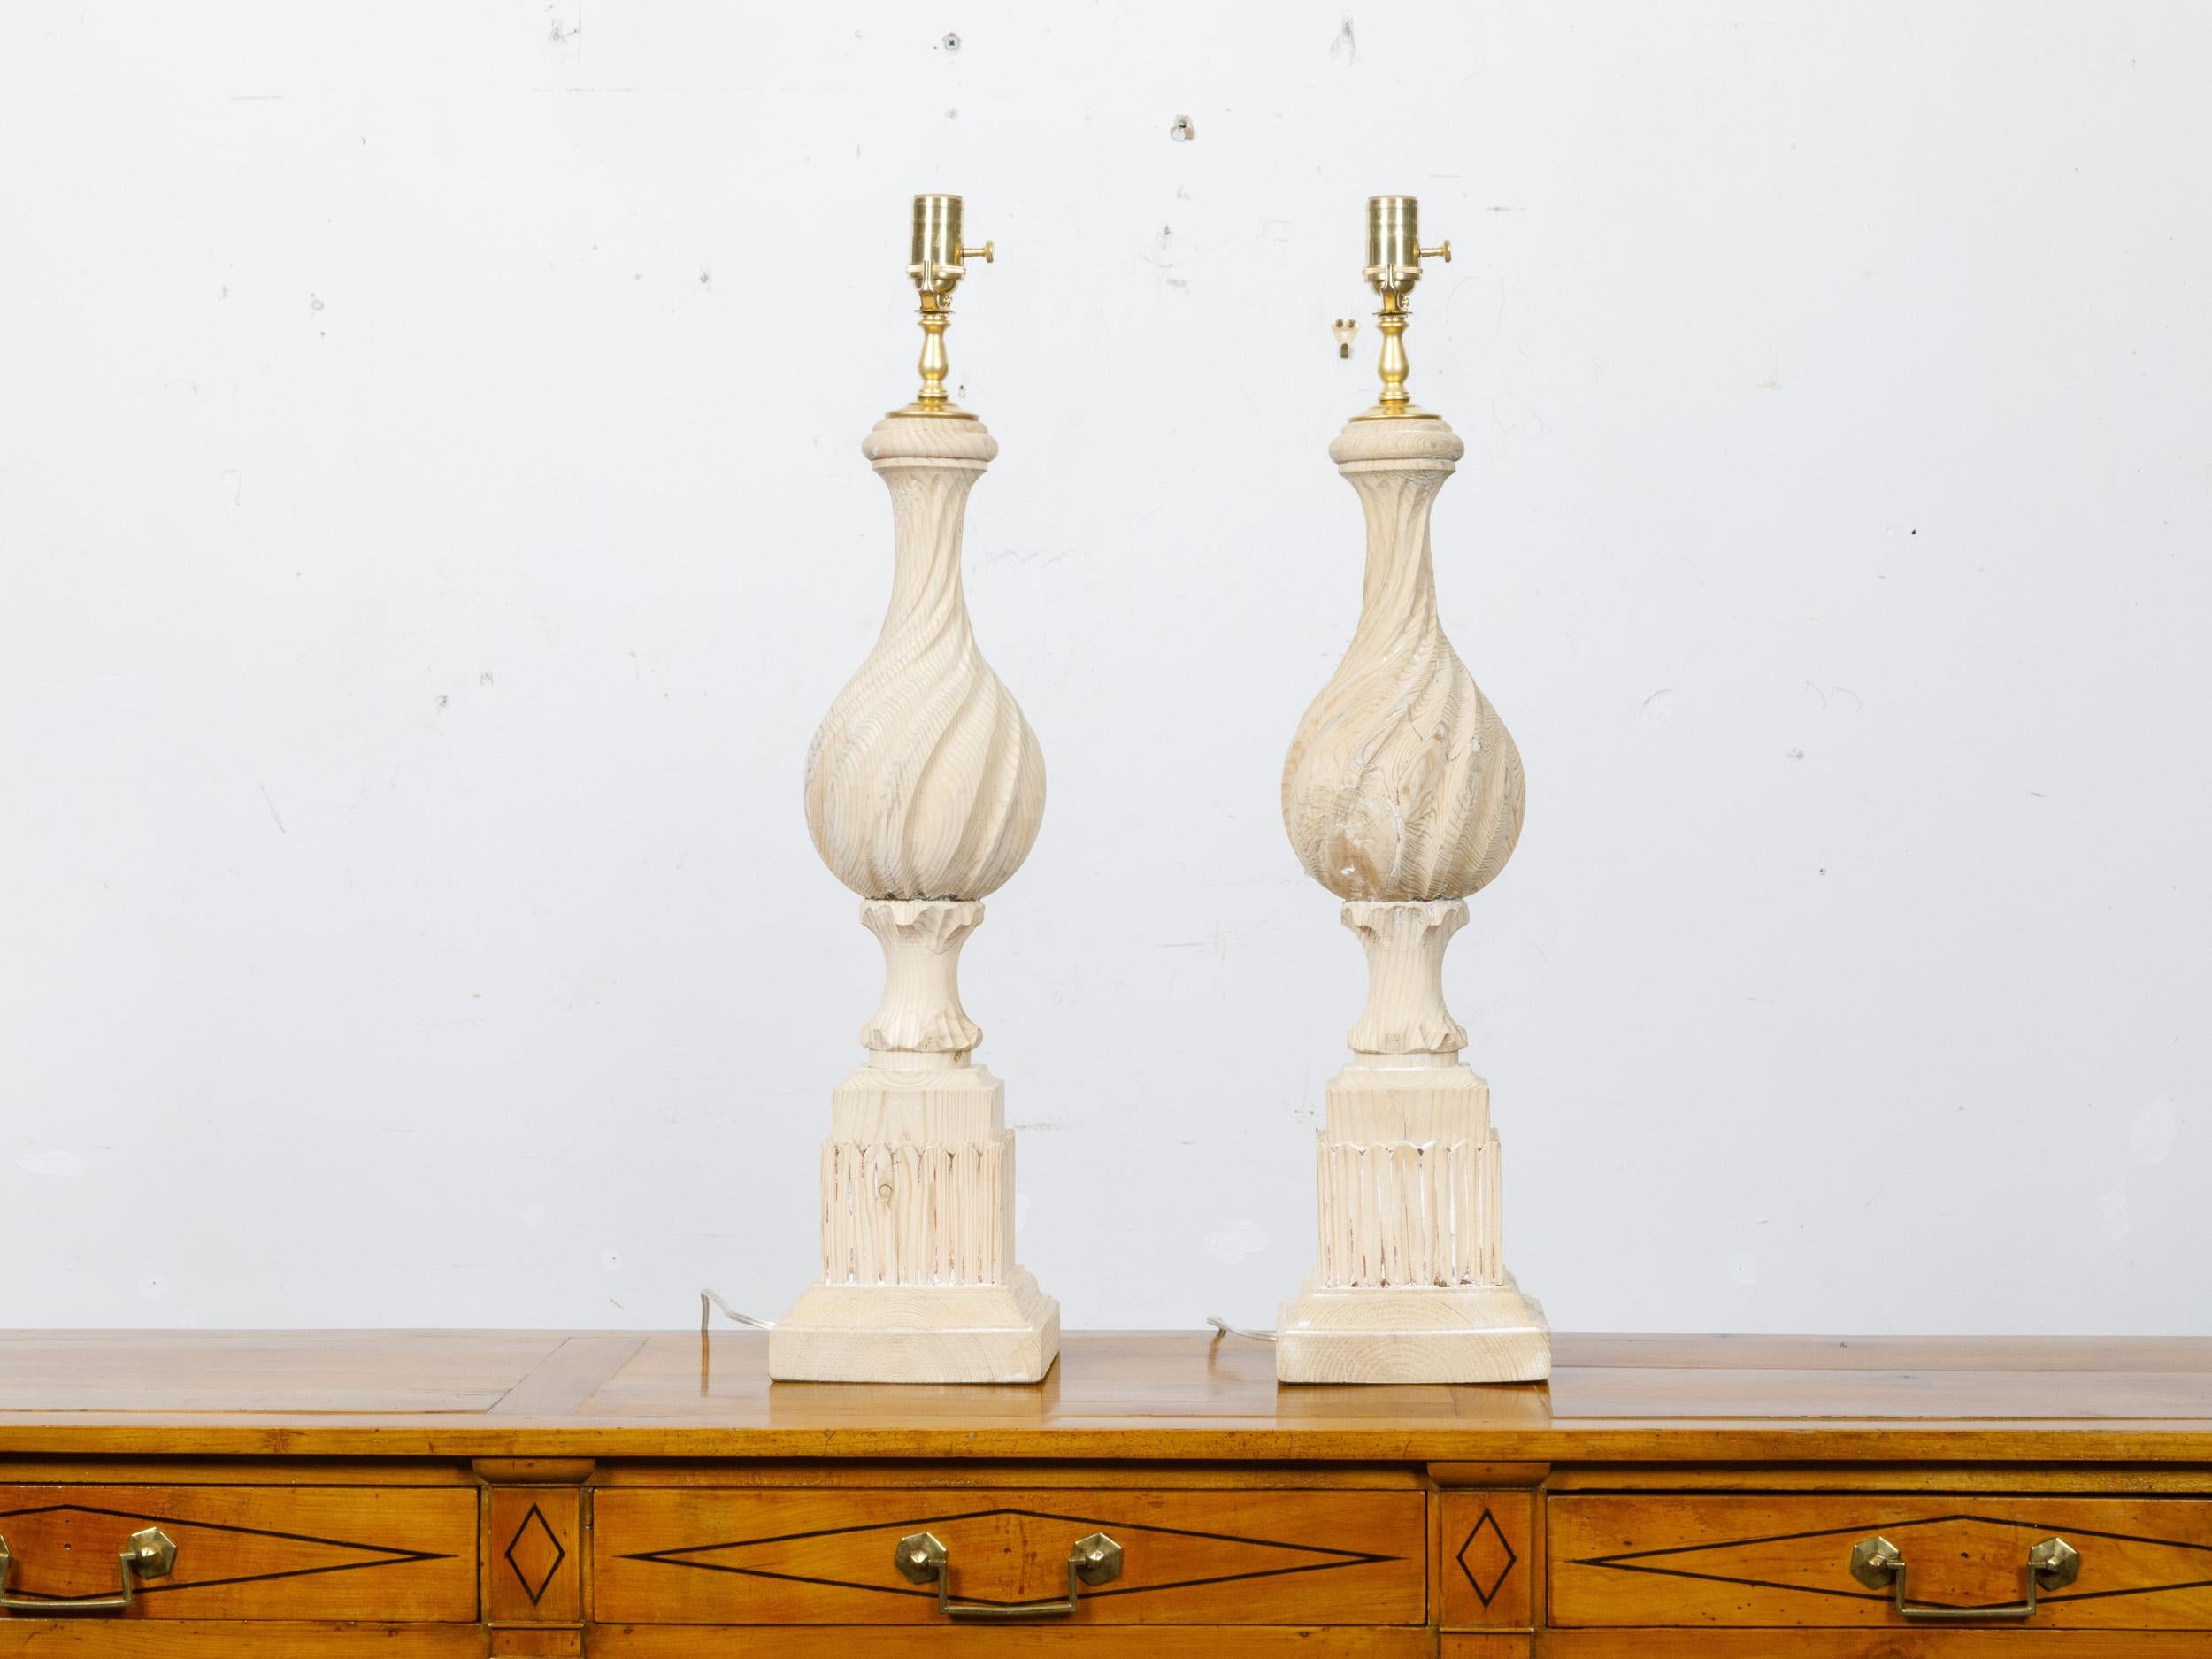 A pair of natural pine finials from the 19th century with twisted motifs and traces of white paint, made into table lamps wired for the USA. This pair of table lamps, ingeniously crafted from 19th-century natural pine finials, combines historical